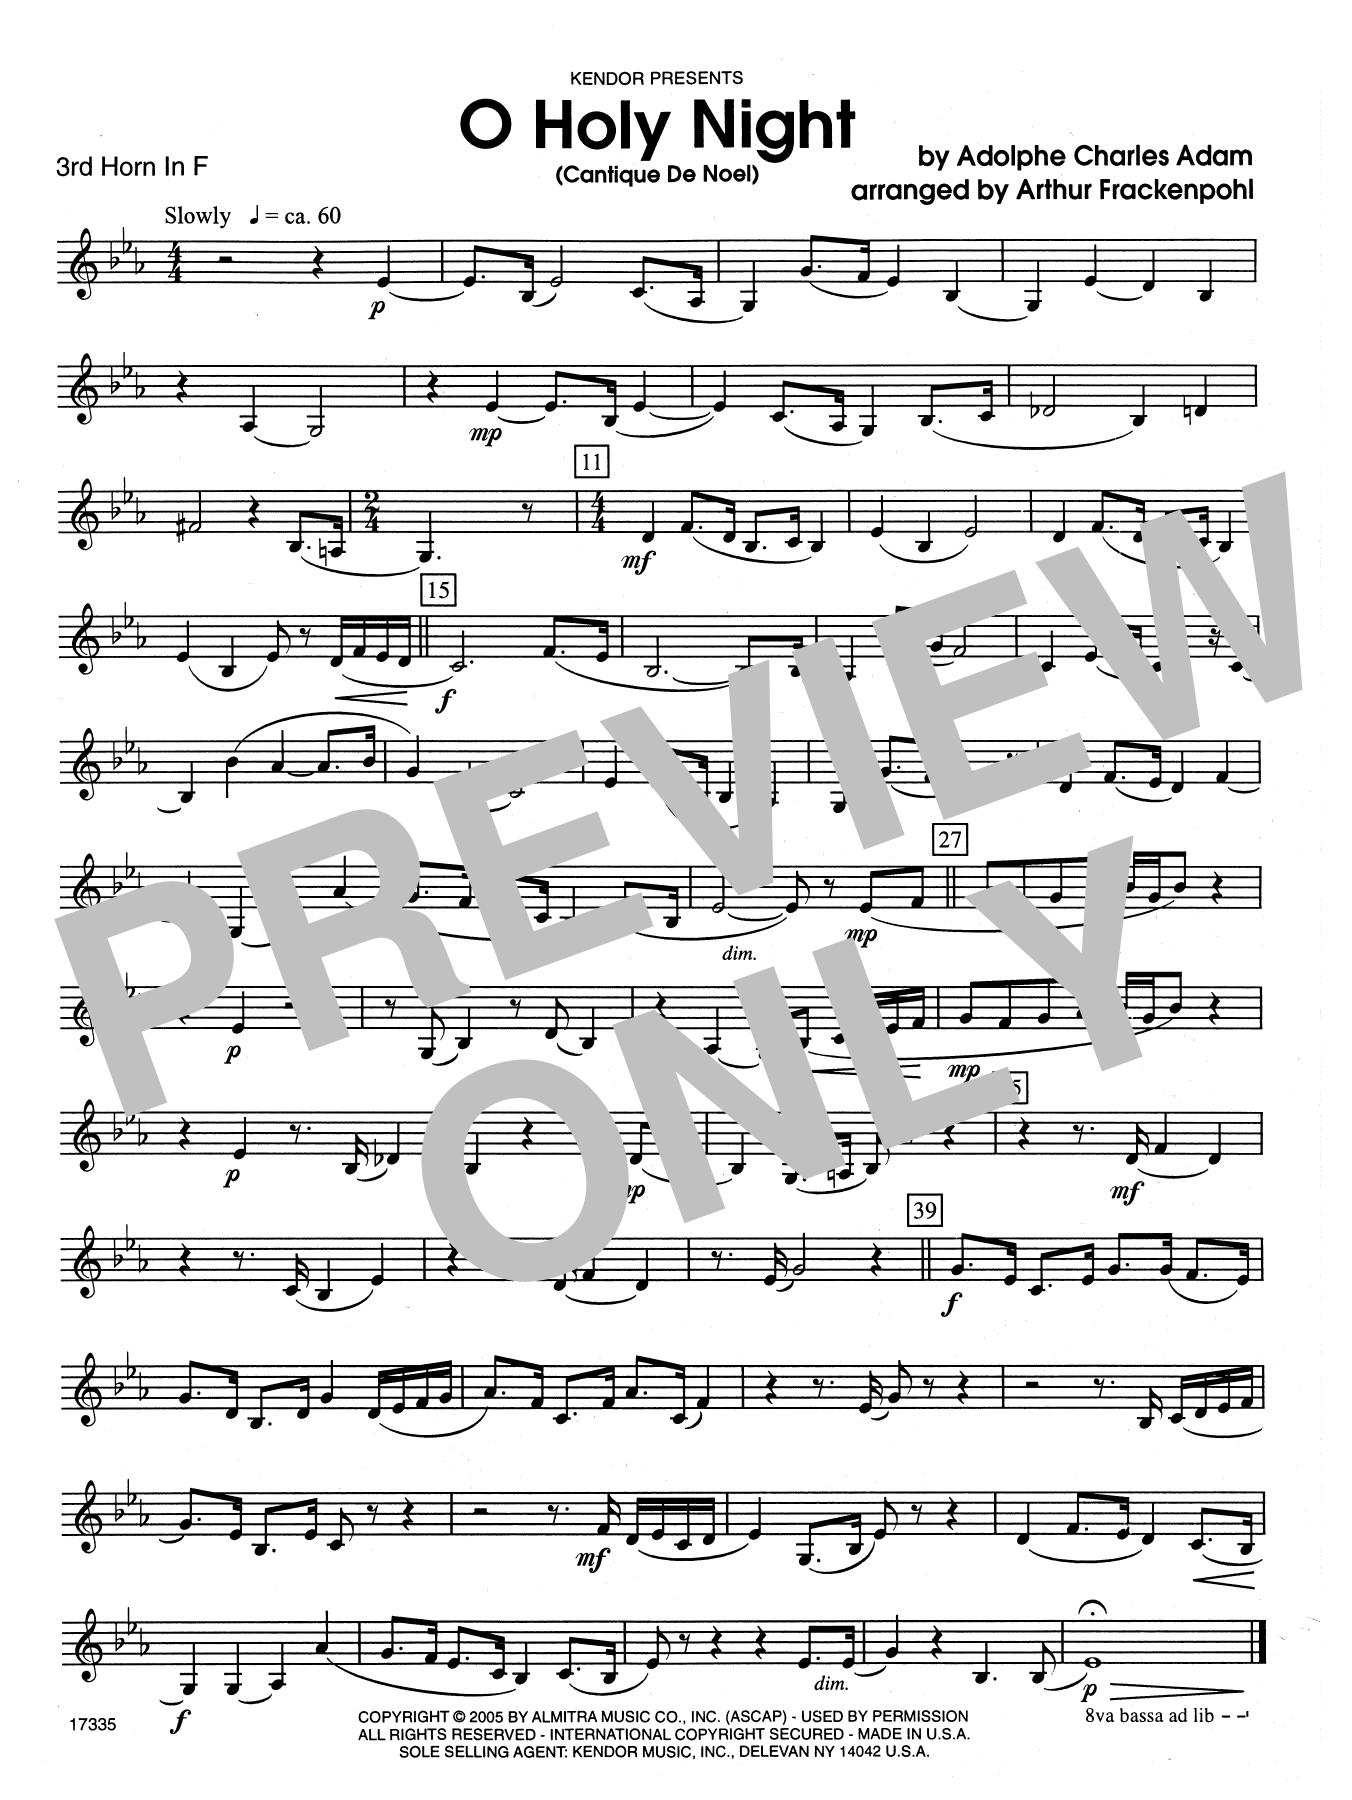 Arthur Frackenpohl O Holy Night (Cantique de Noel) - 3rd Horn in F sheet music notes and chords. Download Printable PDF.